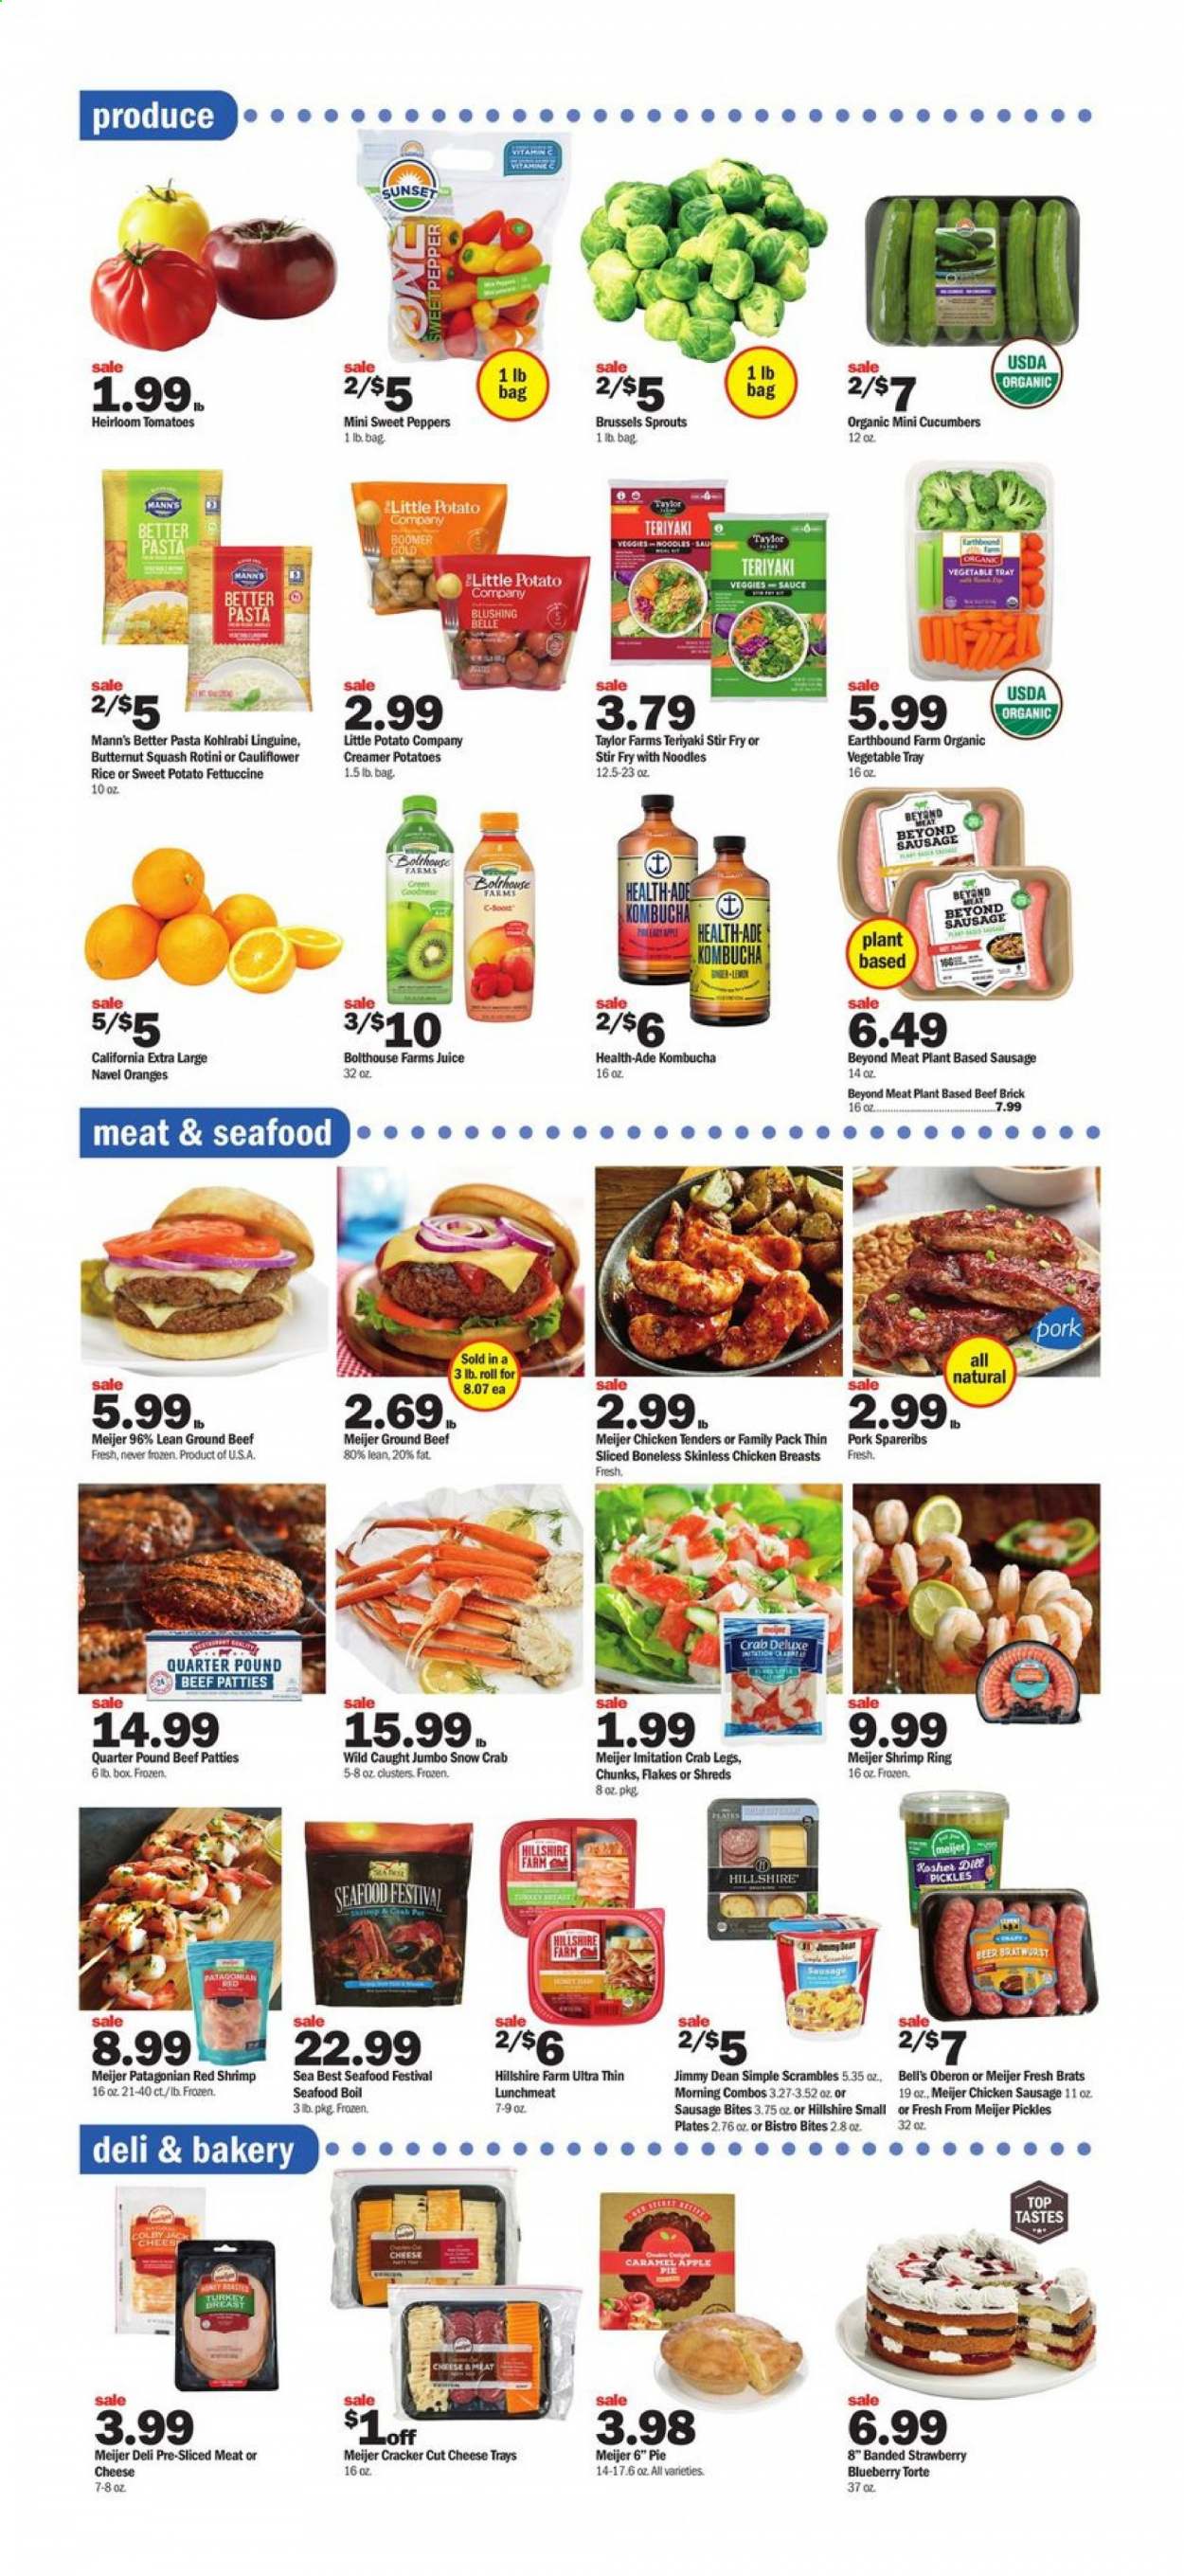 thumbnail - Meijer Flyer - 06/20/2021 - 06/26/2021 - Sales products - pie, apple pie, cauliflower, cucumber, sweet peppers, sweet potato, tomatoes, potatoes, kohlrabi, peppers, brussel sprouts, oranges, seafood, crab legs, crab, shrimps, seafood boil, pasta, sauce, Jimmy Dean, Hillshire Farm, bratwurst, sausage, chicken sausage, lunch meat, crackers, pickles, dill, juice, kombucha, Boost, beer, chicken breasts, chicken tenders, beef meat, ground beef, pork spare ribs, tray, plate, butternut squash, navel oranges. Page 4.